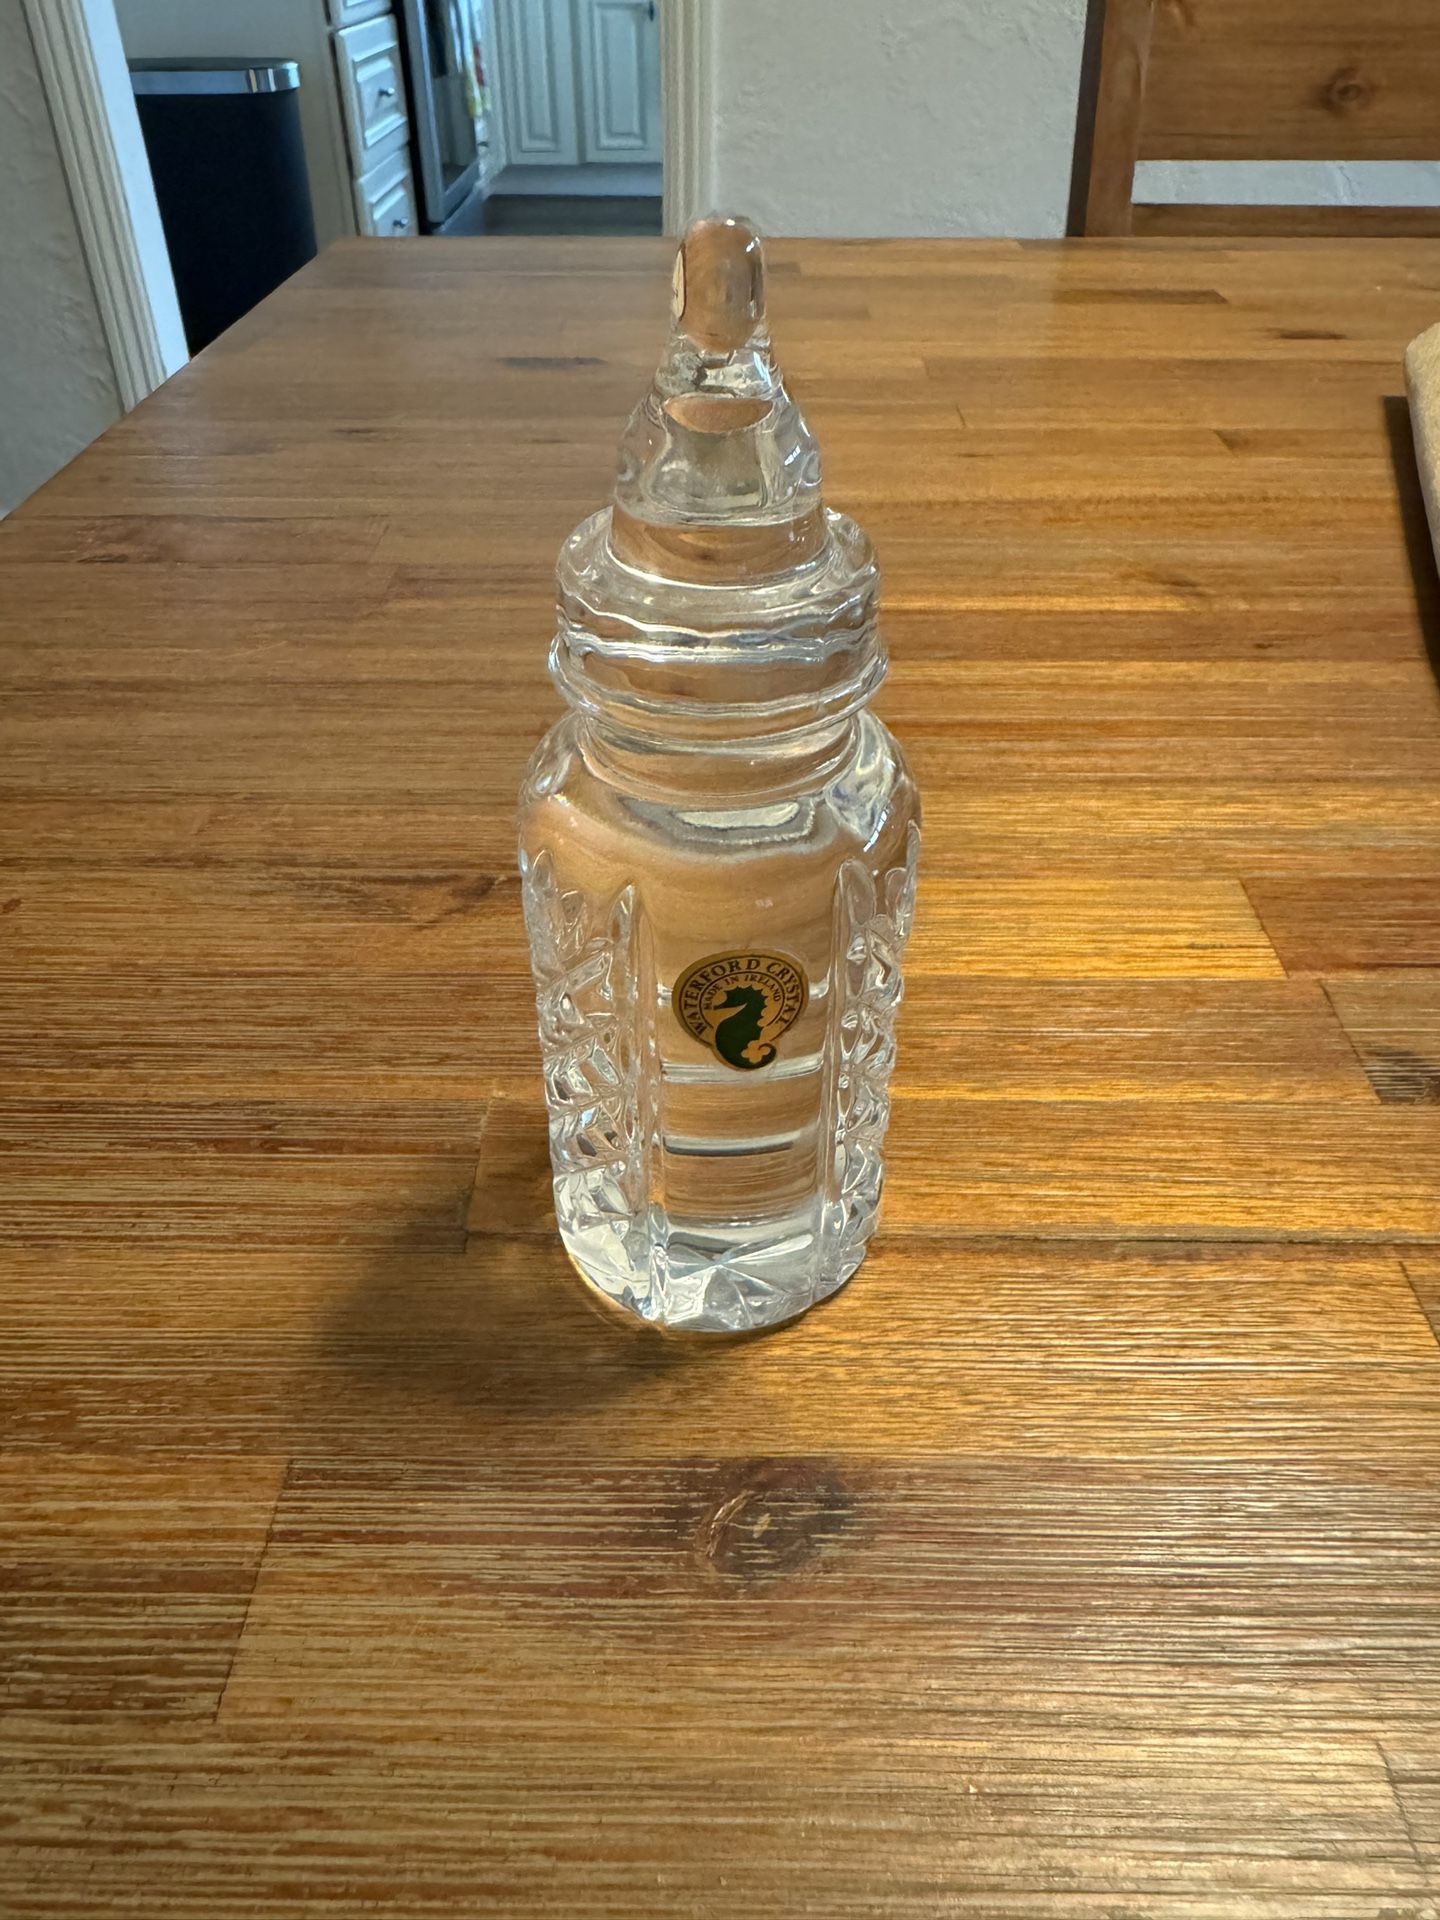 Waterford Crystal Baby Bottle